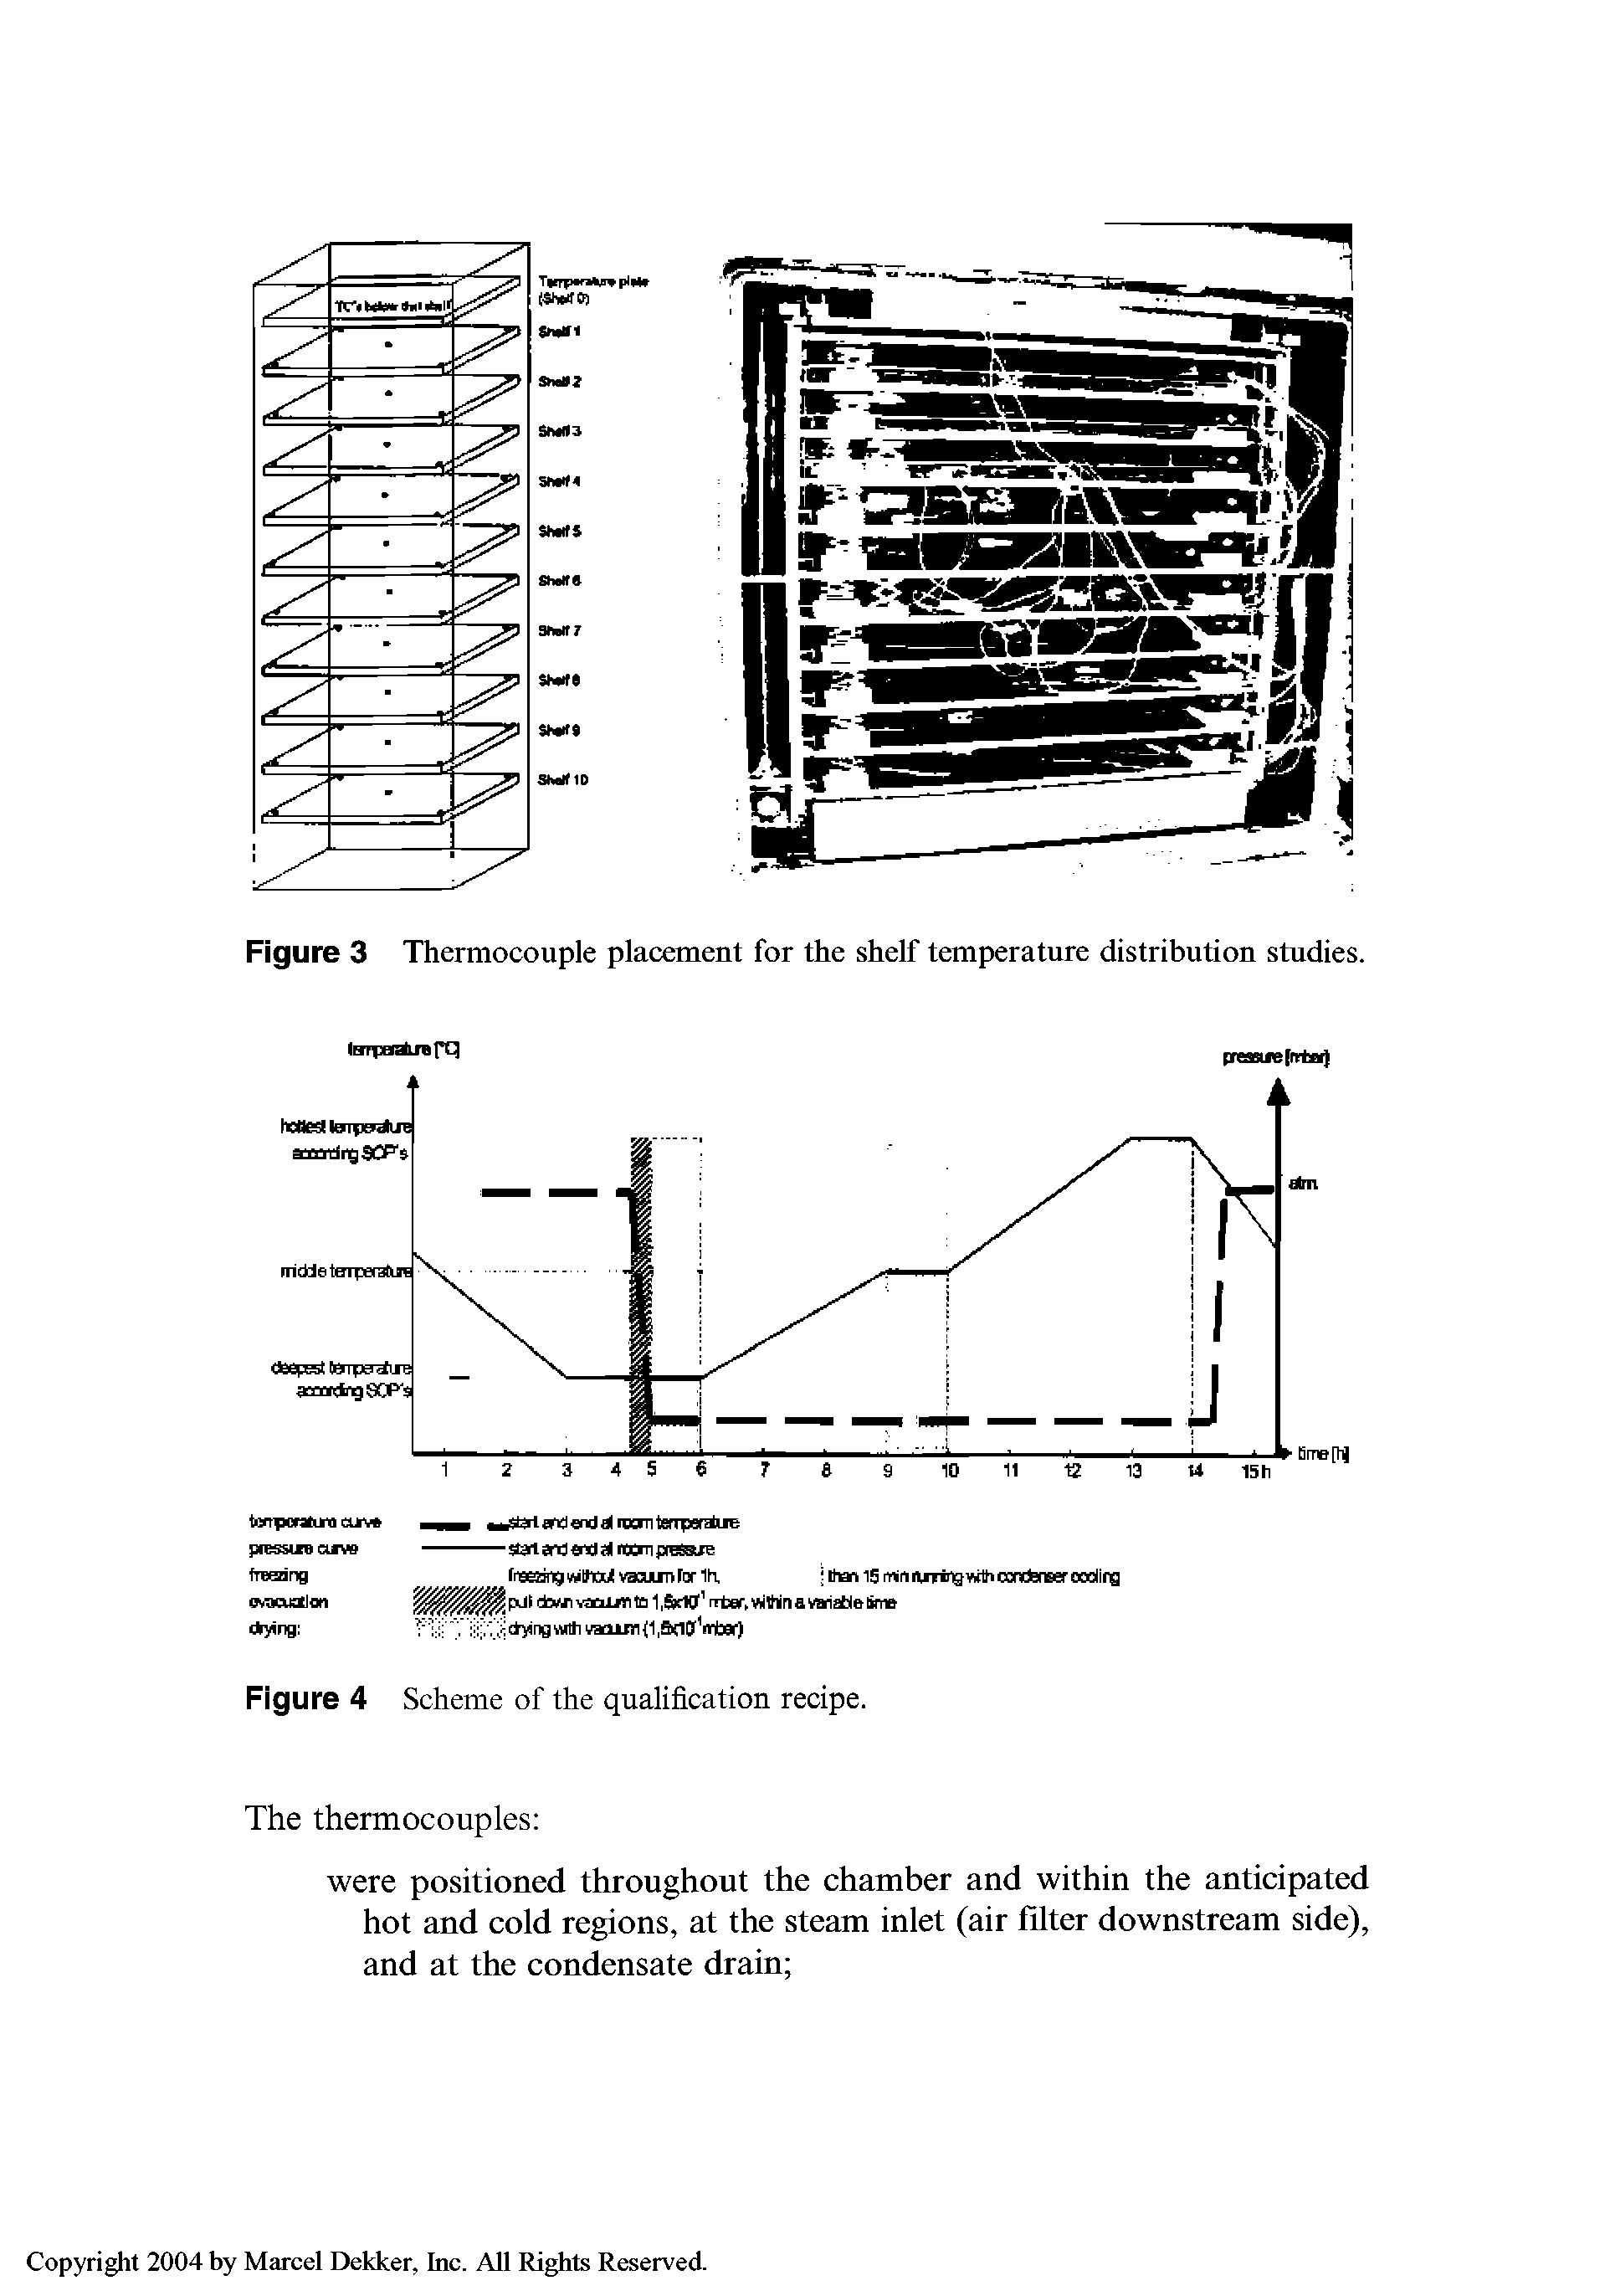 Figure 3 Thermocouple placement for the shelf temperature distribution studies.